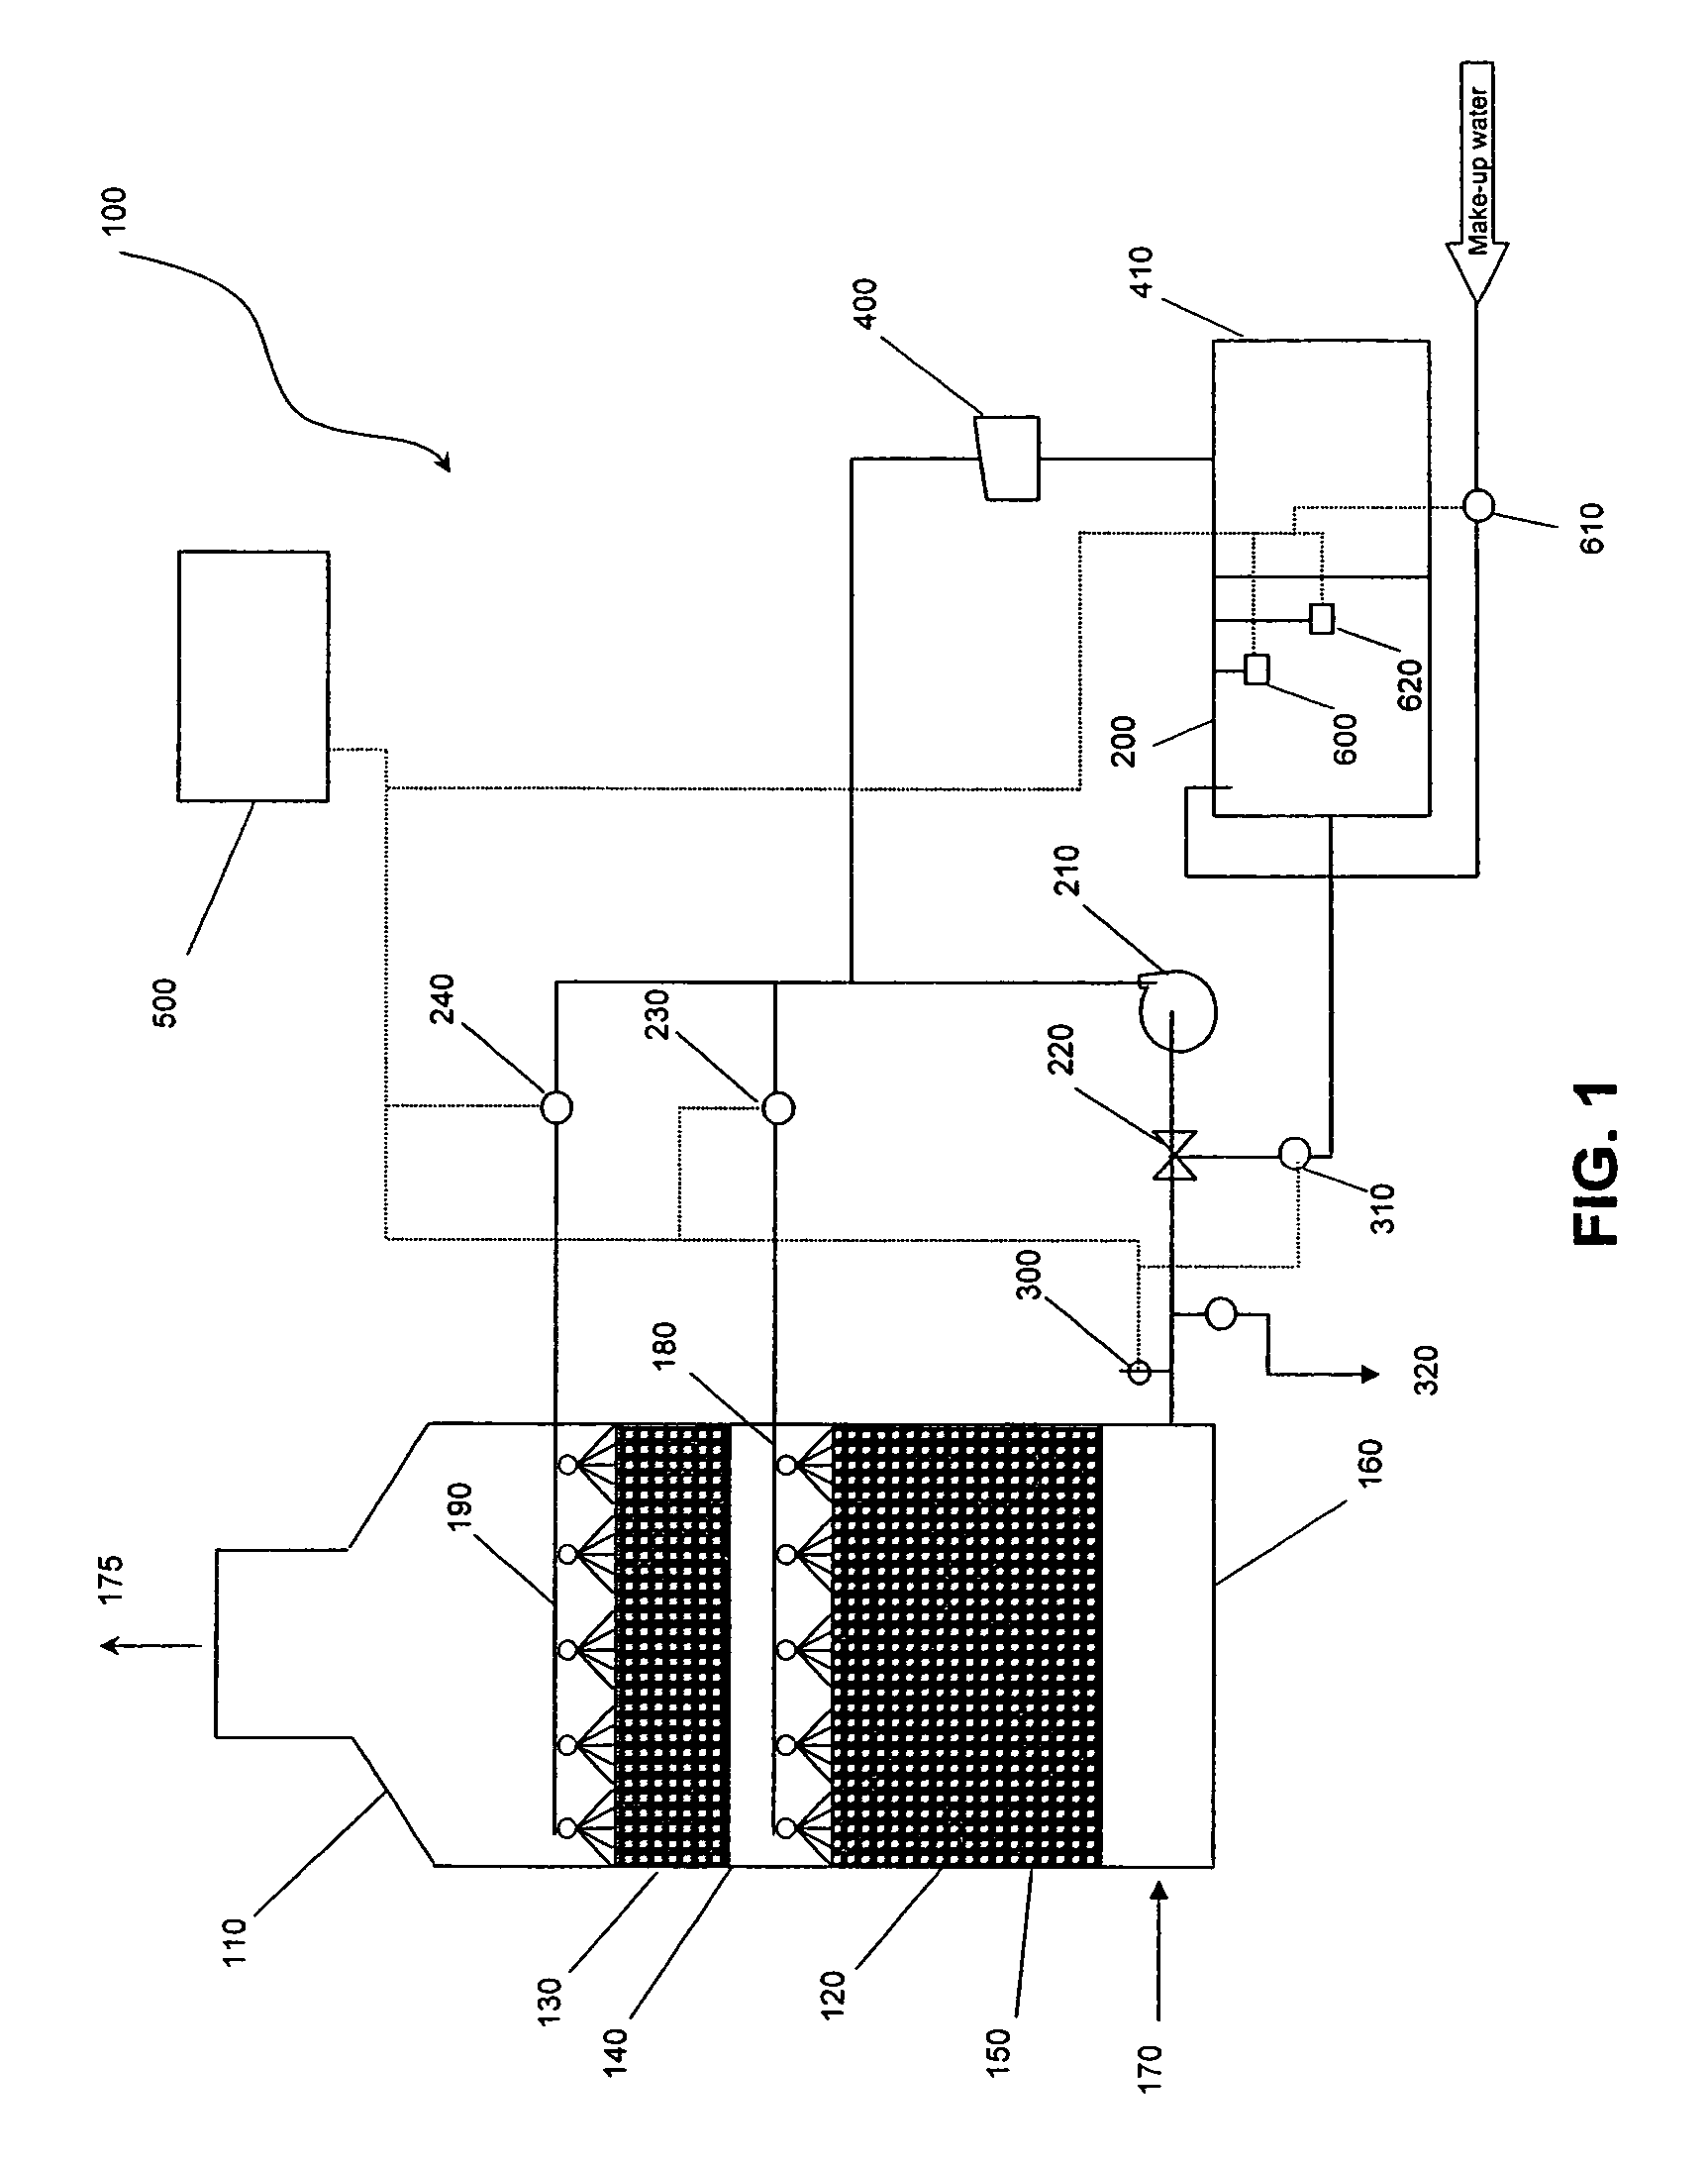 Biological scrubber odor control system and method